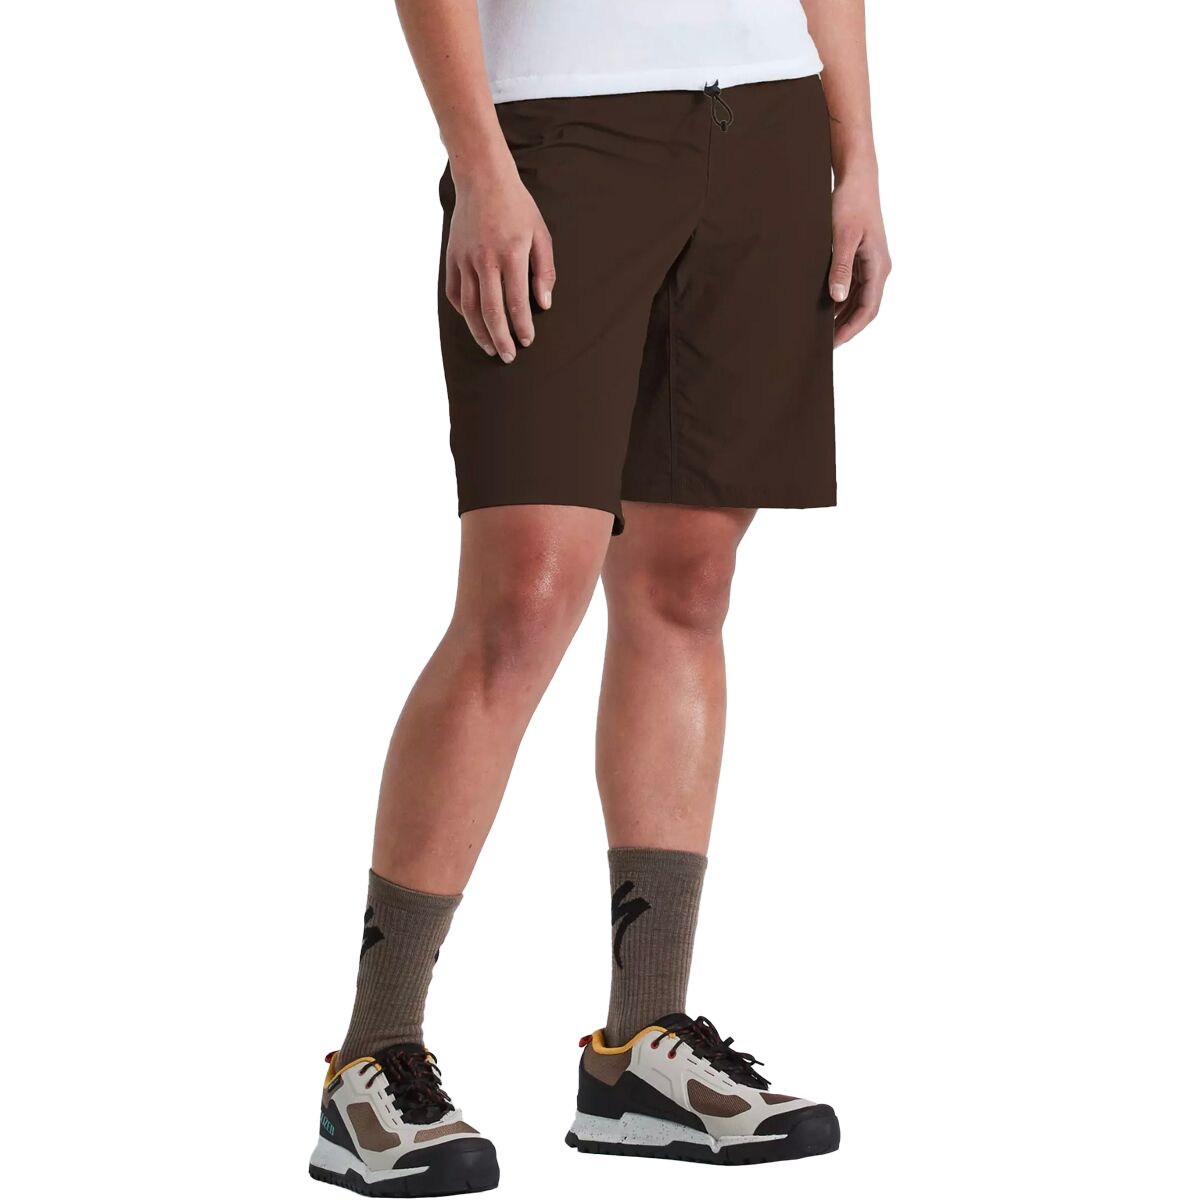 Specialized Adv Air Short - Women's